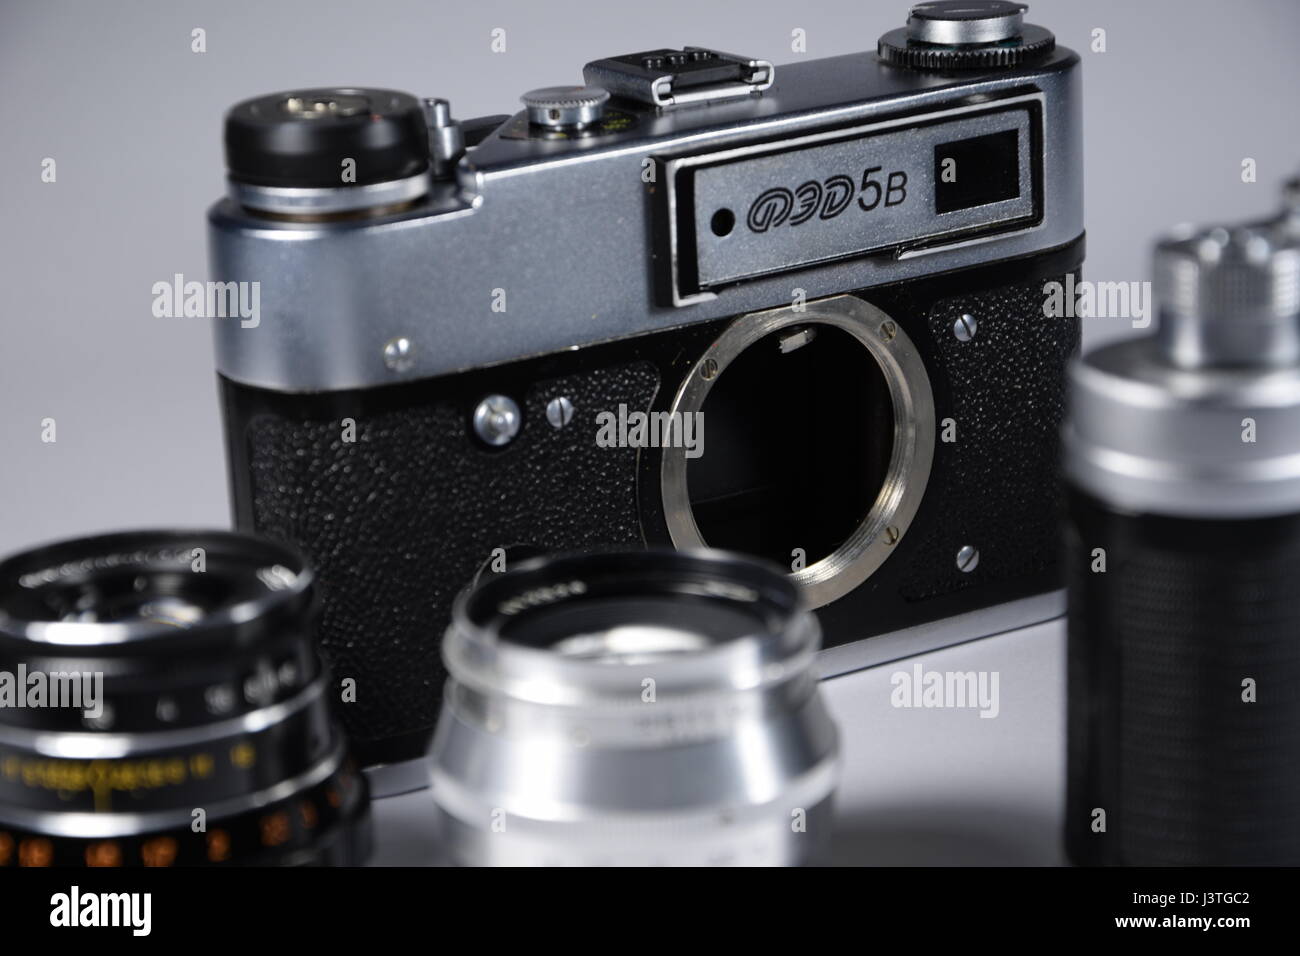 Old soviet camera FED 5B with old lenses Stock Photo